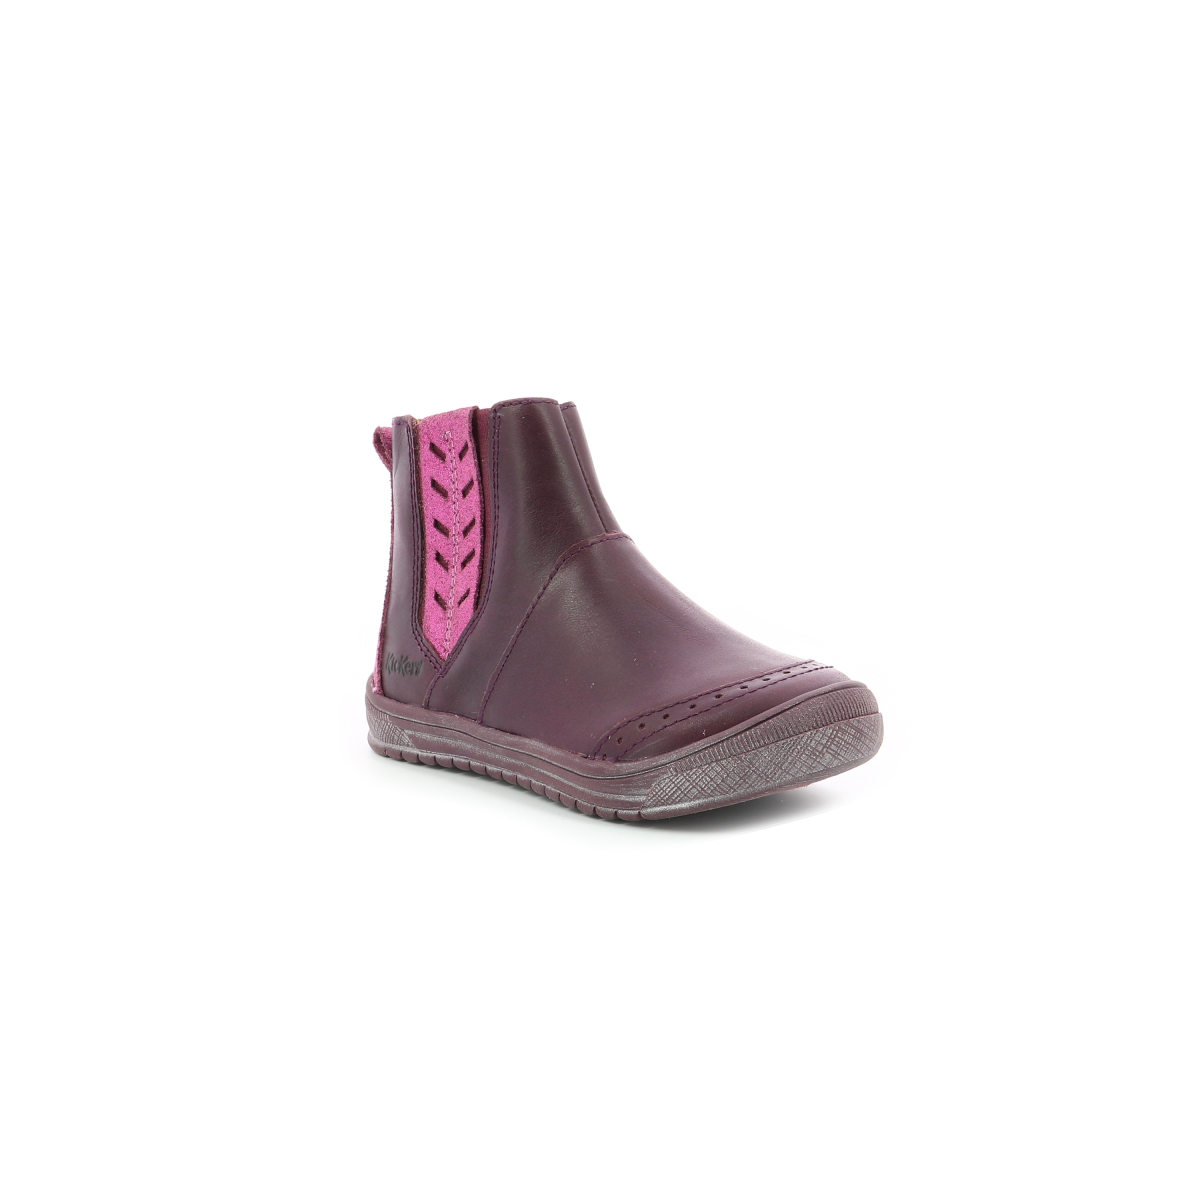 Kickers boots, bottines violet fille